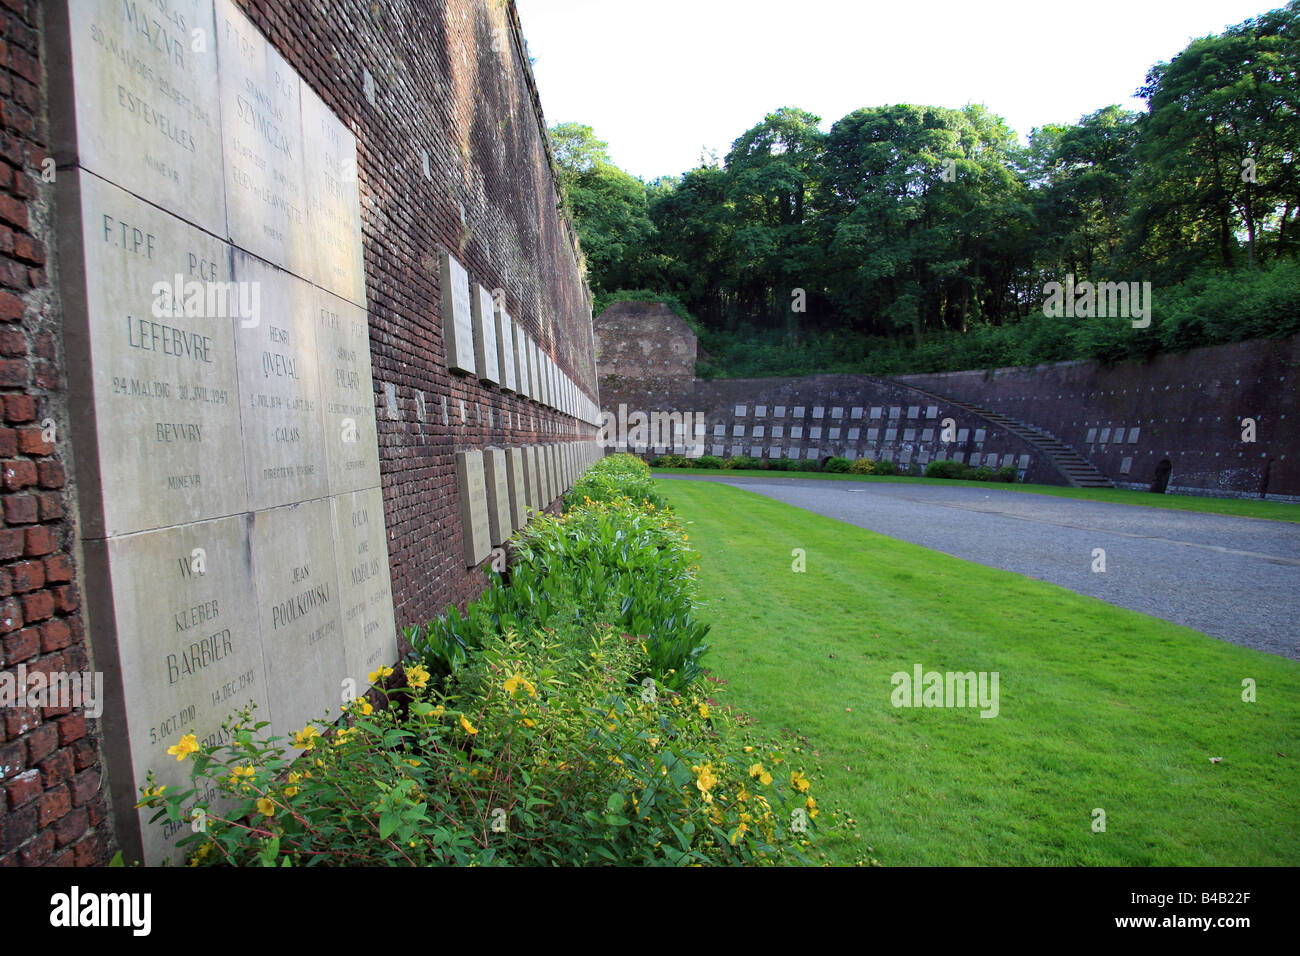 Rows of memorial plaques to commemorate over 200 resistance fighters executed in the Citadel, Arras, France during World War Two Stock Photo